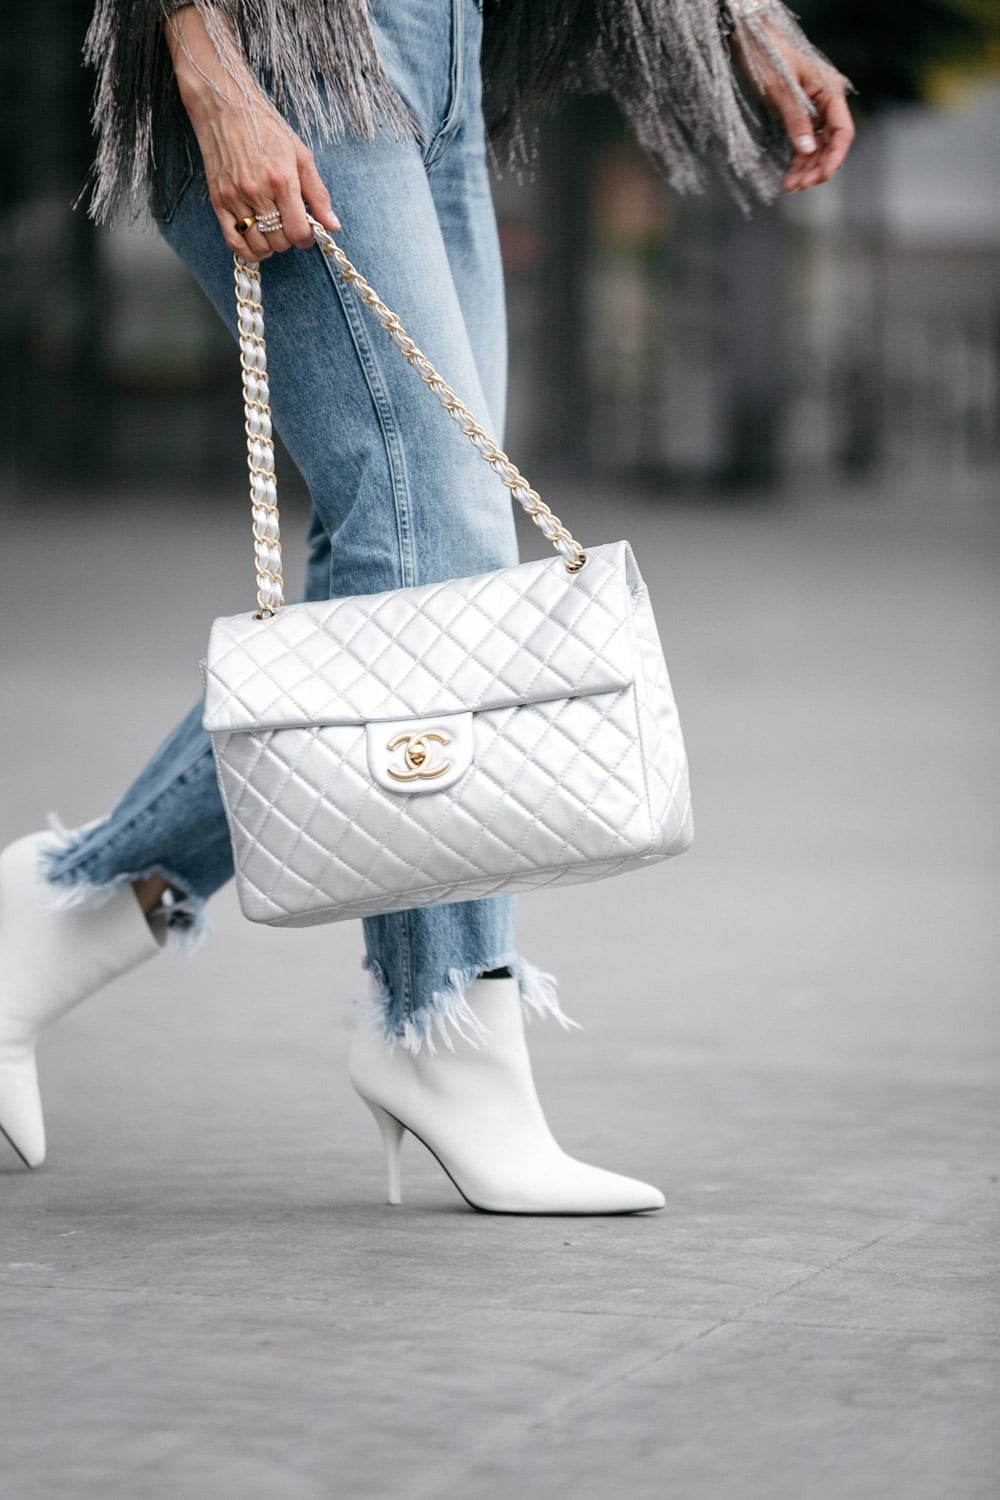 style of sam in vintage chanel silver maxi flap bag white booties 3x1 shelter crop jeans